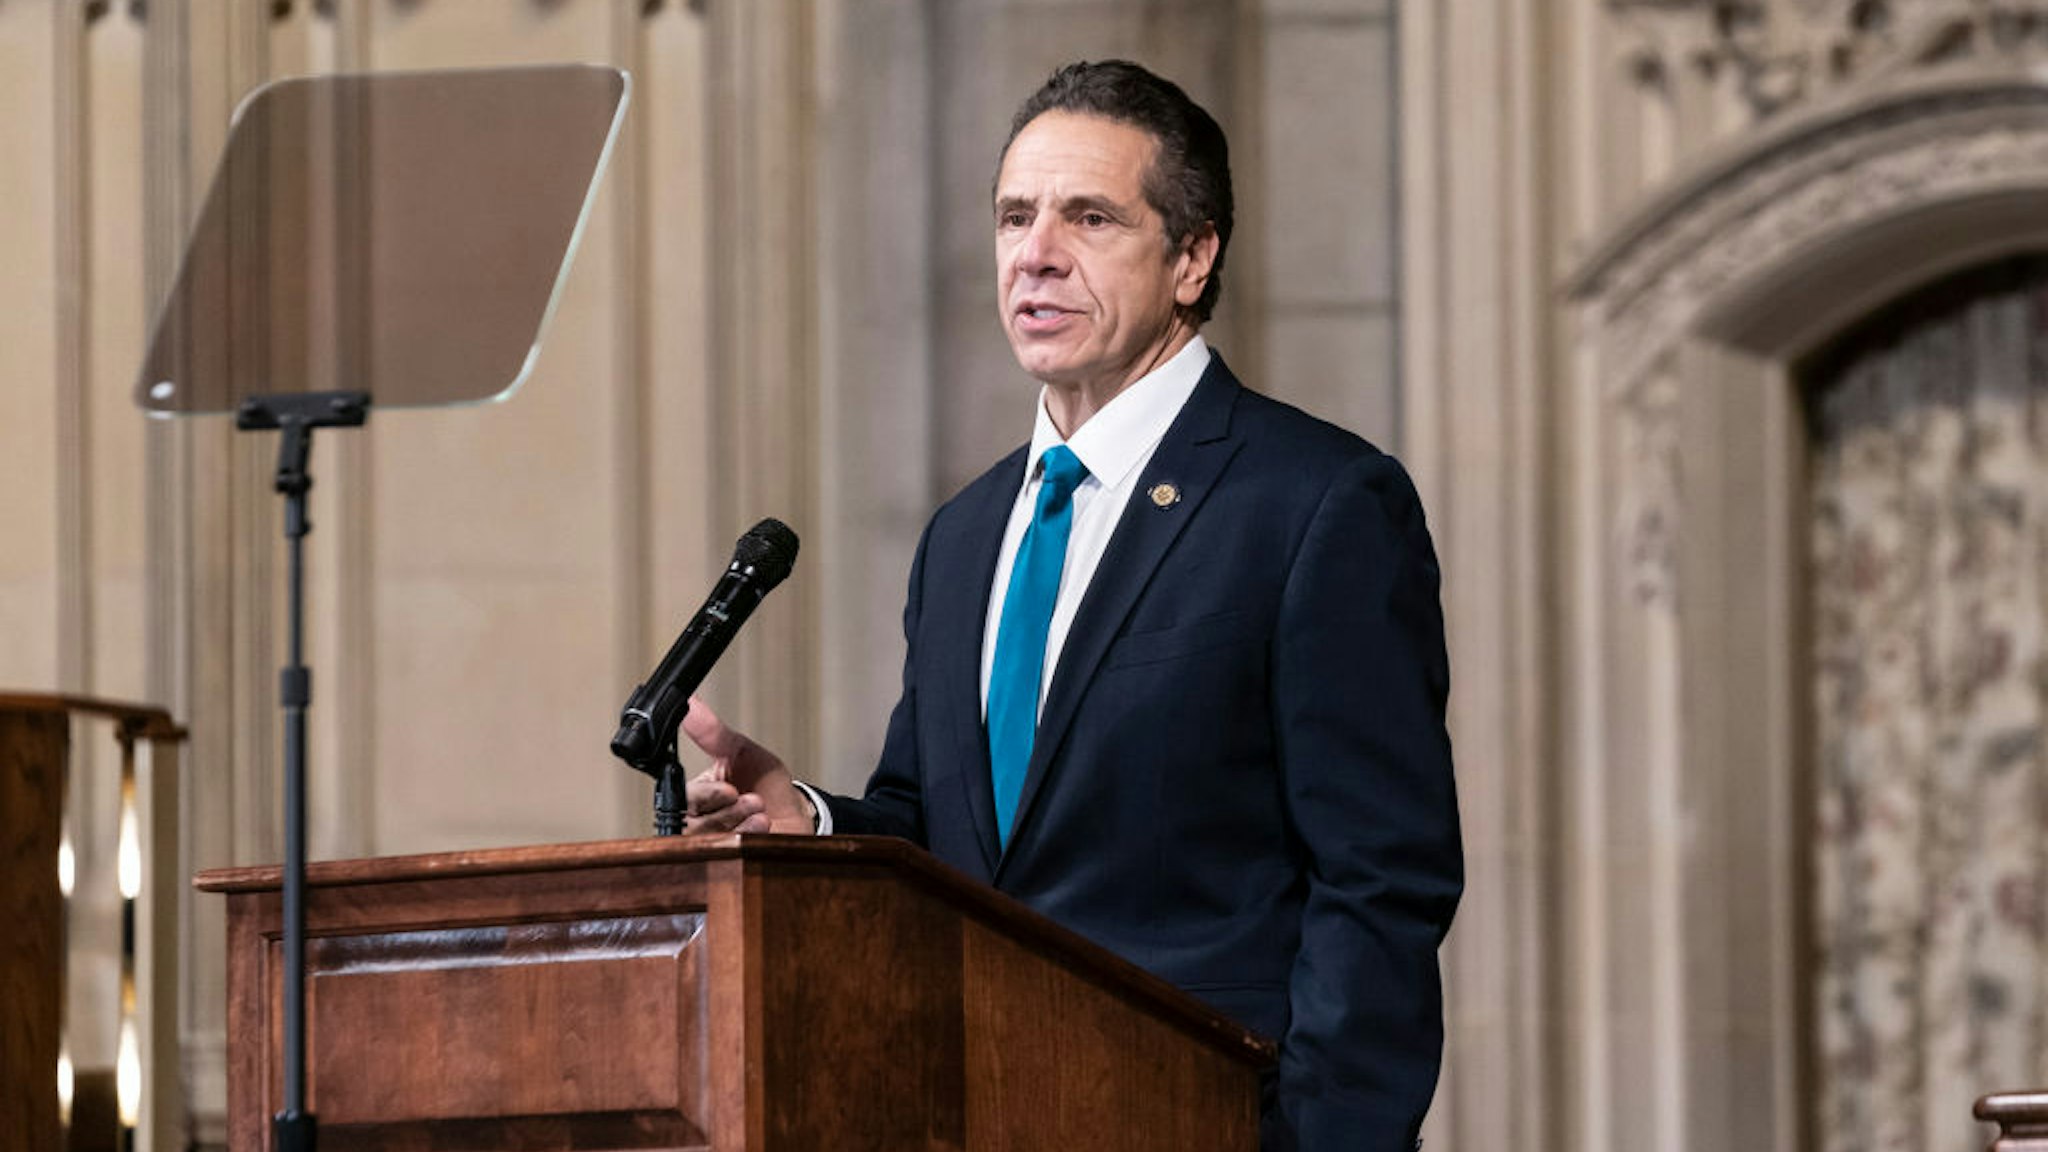 NEW YORK, UNITED STATES - 2020/11/15: Governor Andrew Cuomo delivers remarks at Riverside Church during morning worship on the inequities in the Trump administration's vaccine distribution plan. The Governor declared that New York State will mobilize an army to vaccinate all New Yorkers fairly, equitably. Governor reminded to the audience words by Reverend Dr. King who said of all the forms of inequality, injustice in health is the most shocking and the most inhumane because it often results in physical death. (Photo by Lev Radin/Pacific Press/LightRocket via Getty Images)